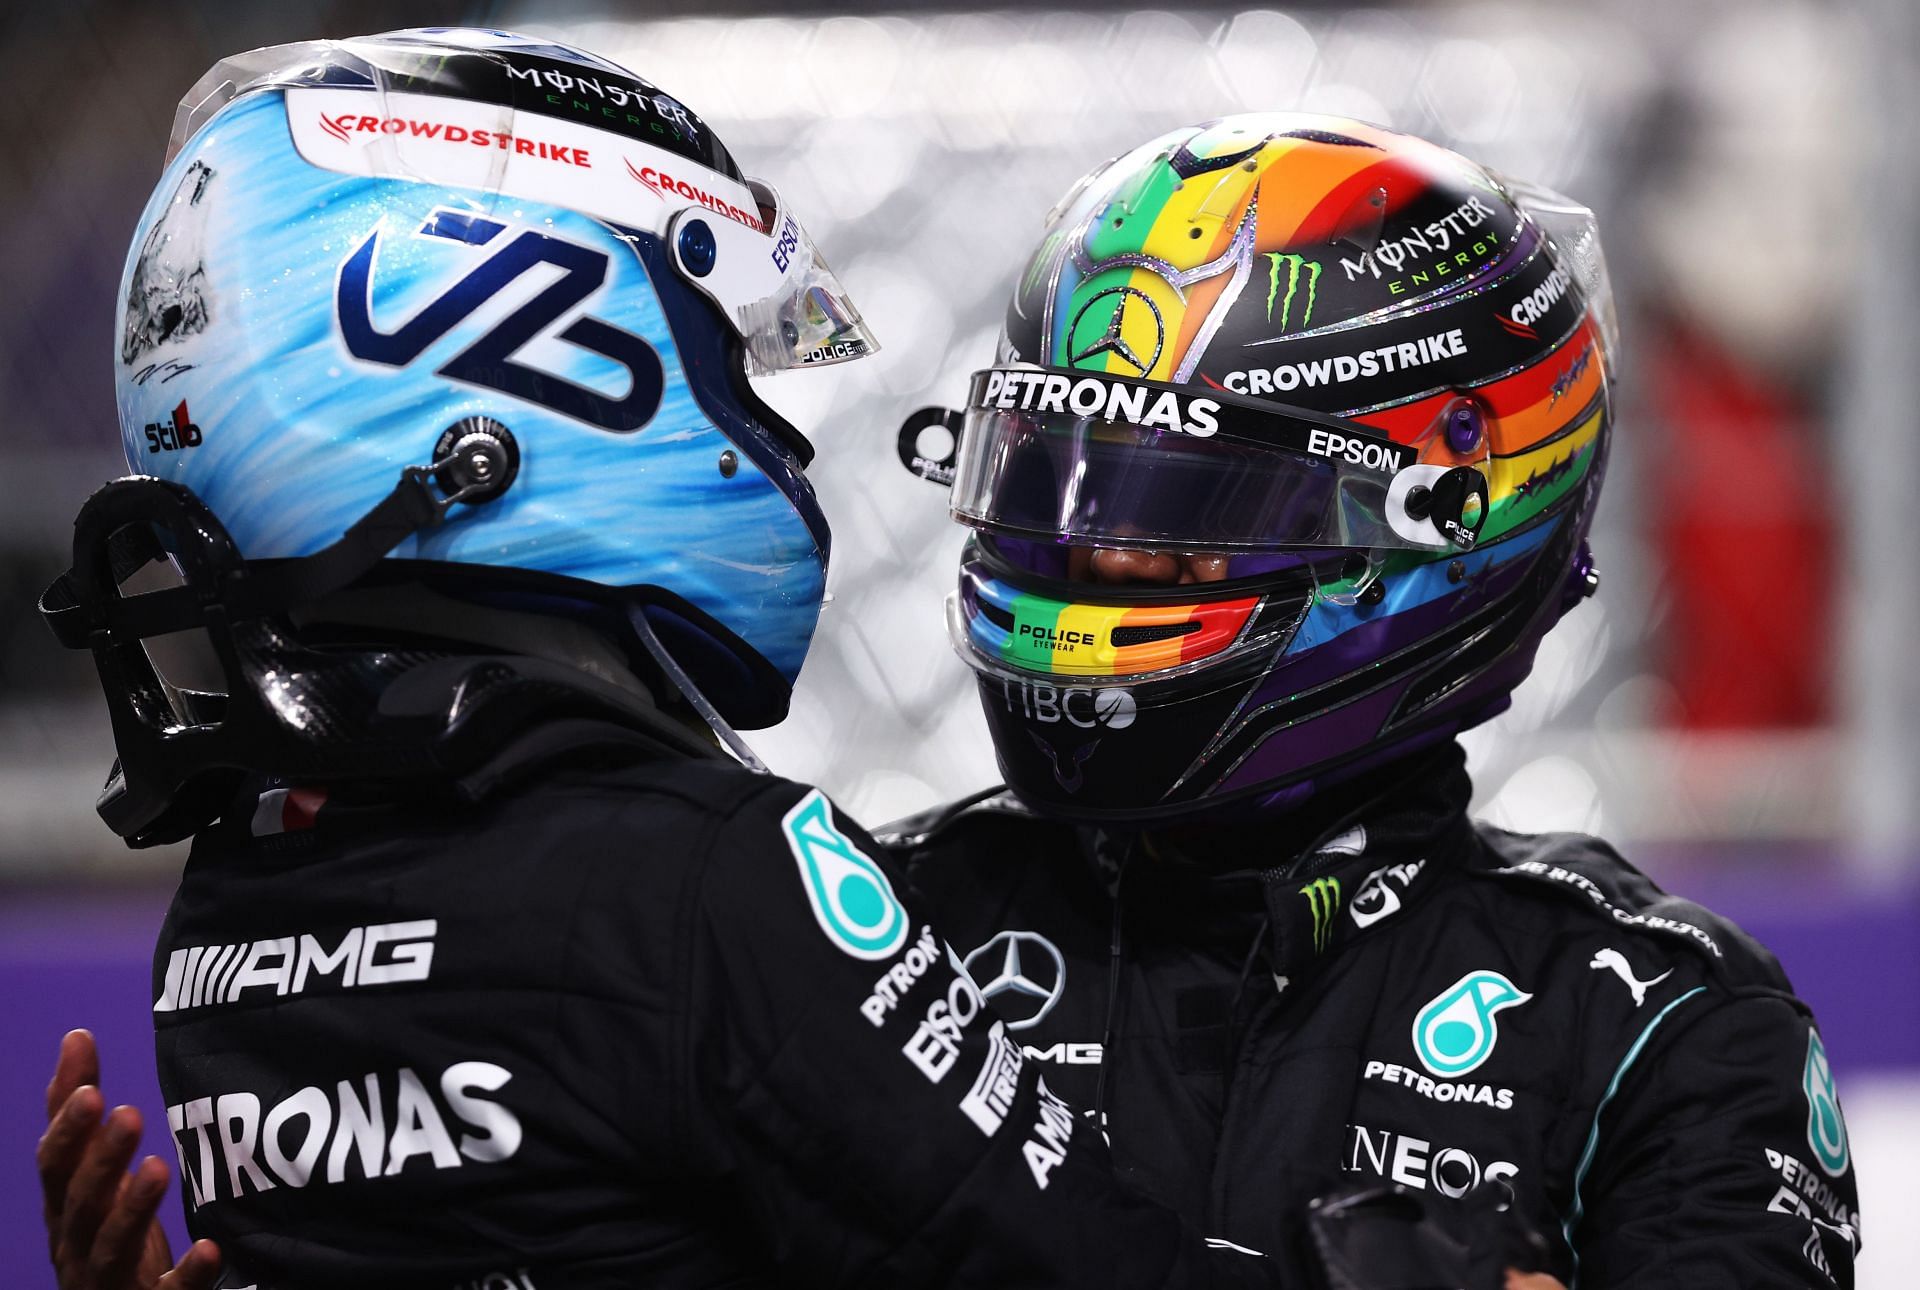 Valtteri Bottas (left) and Lewis Hamilton (right) share a moment during the 2021 F1 Saudi Arabian GP weekend. (Photo by Lars Baron/Getty Images)